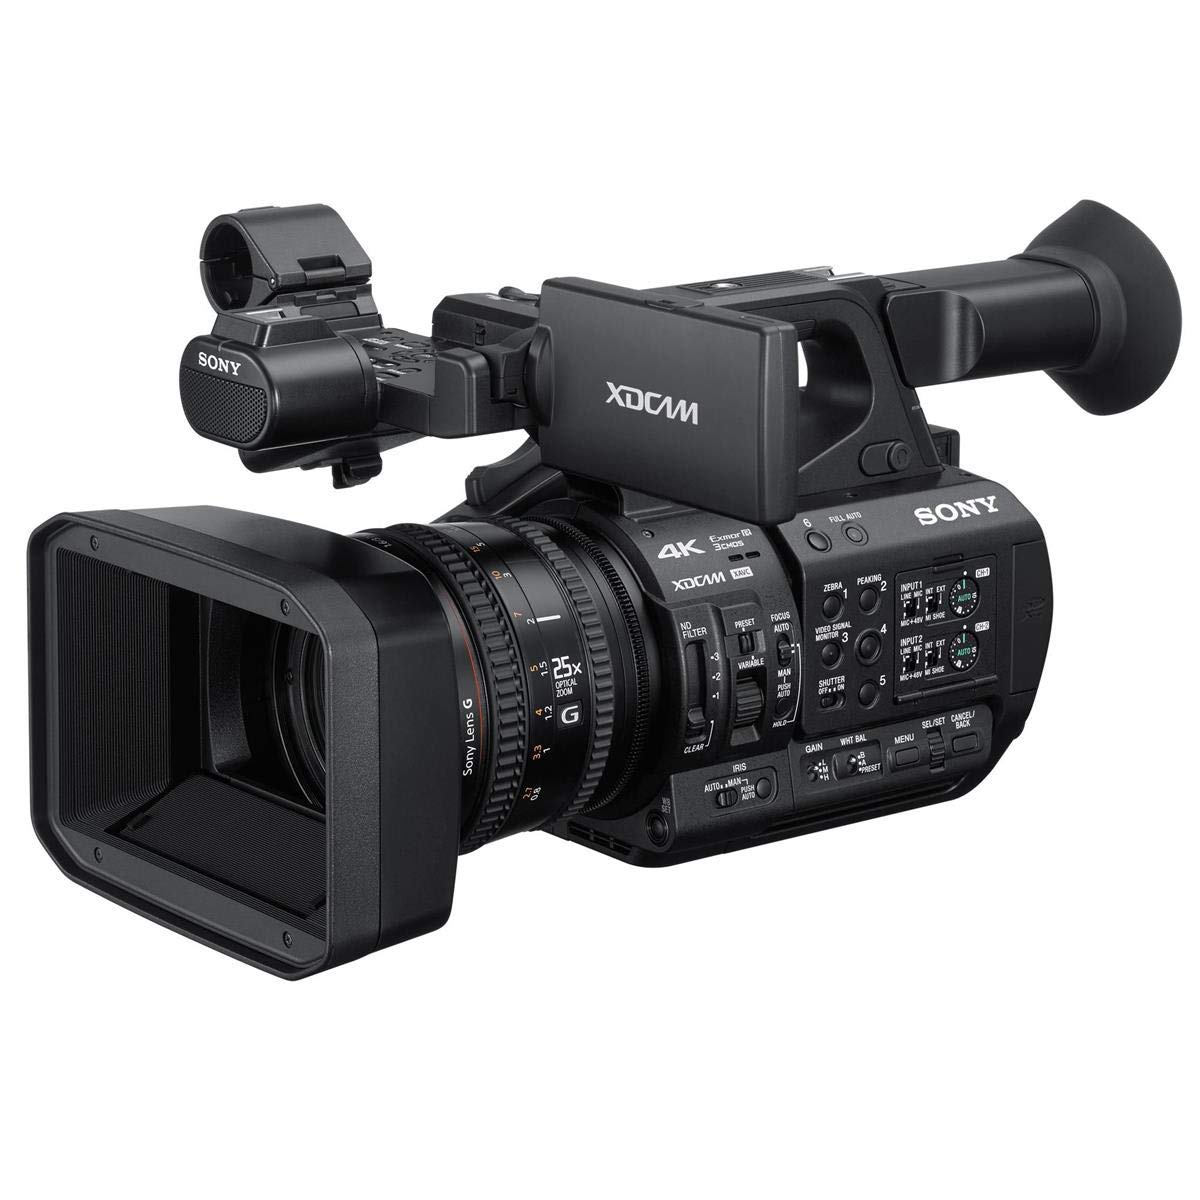 Sony PXW-Z190 Compact 4K 3-CMOS 1/3-type Sensor XDCAM Camcorder - Bundle with Video Bag, 64GB SDXC U3 Card, Video Tripod, Cleaning Kit, Memory Wallet, Card Reader,